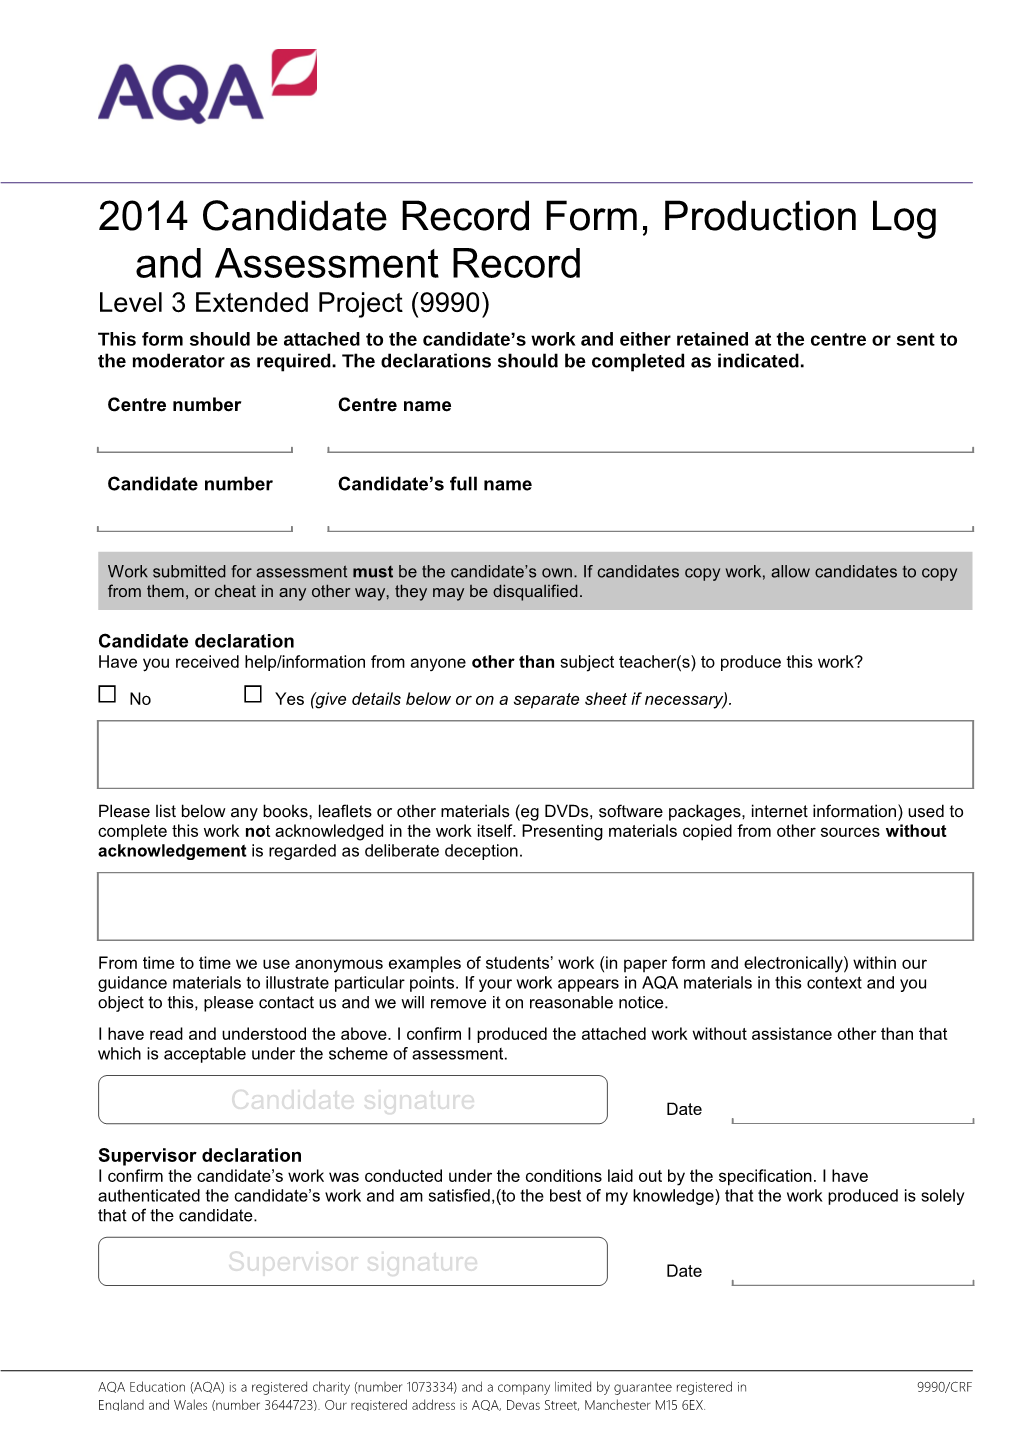 2014 Candidate Record Form, Production Logand Assessment Record